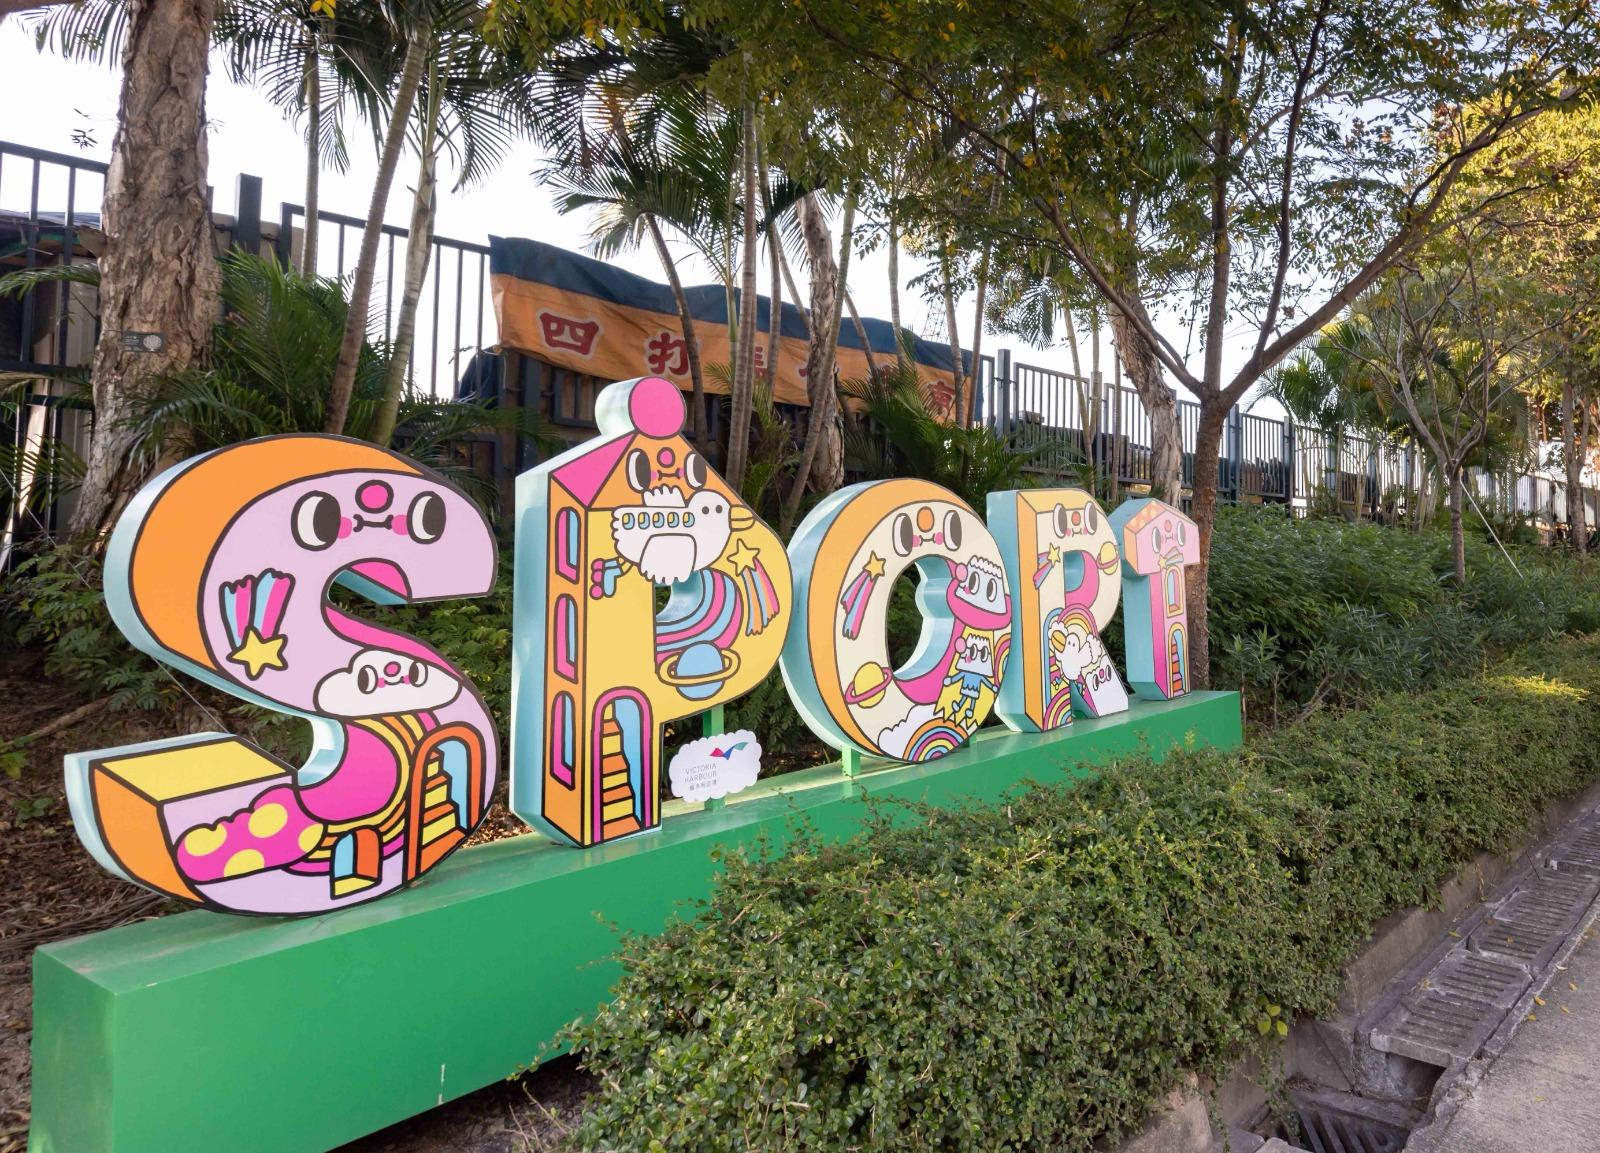 The Water Sports and Recreation Precinct (Phase 3) opened in Wan Chai today (December 30). The beautification work of the 1 kilometre-long pedestrian walkway along Shing Sai Road, Kennedy Town, was also completed. The walkway is decorated with paintings and installations by local artist Messy Desk.